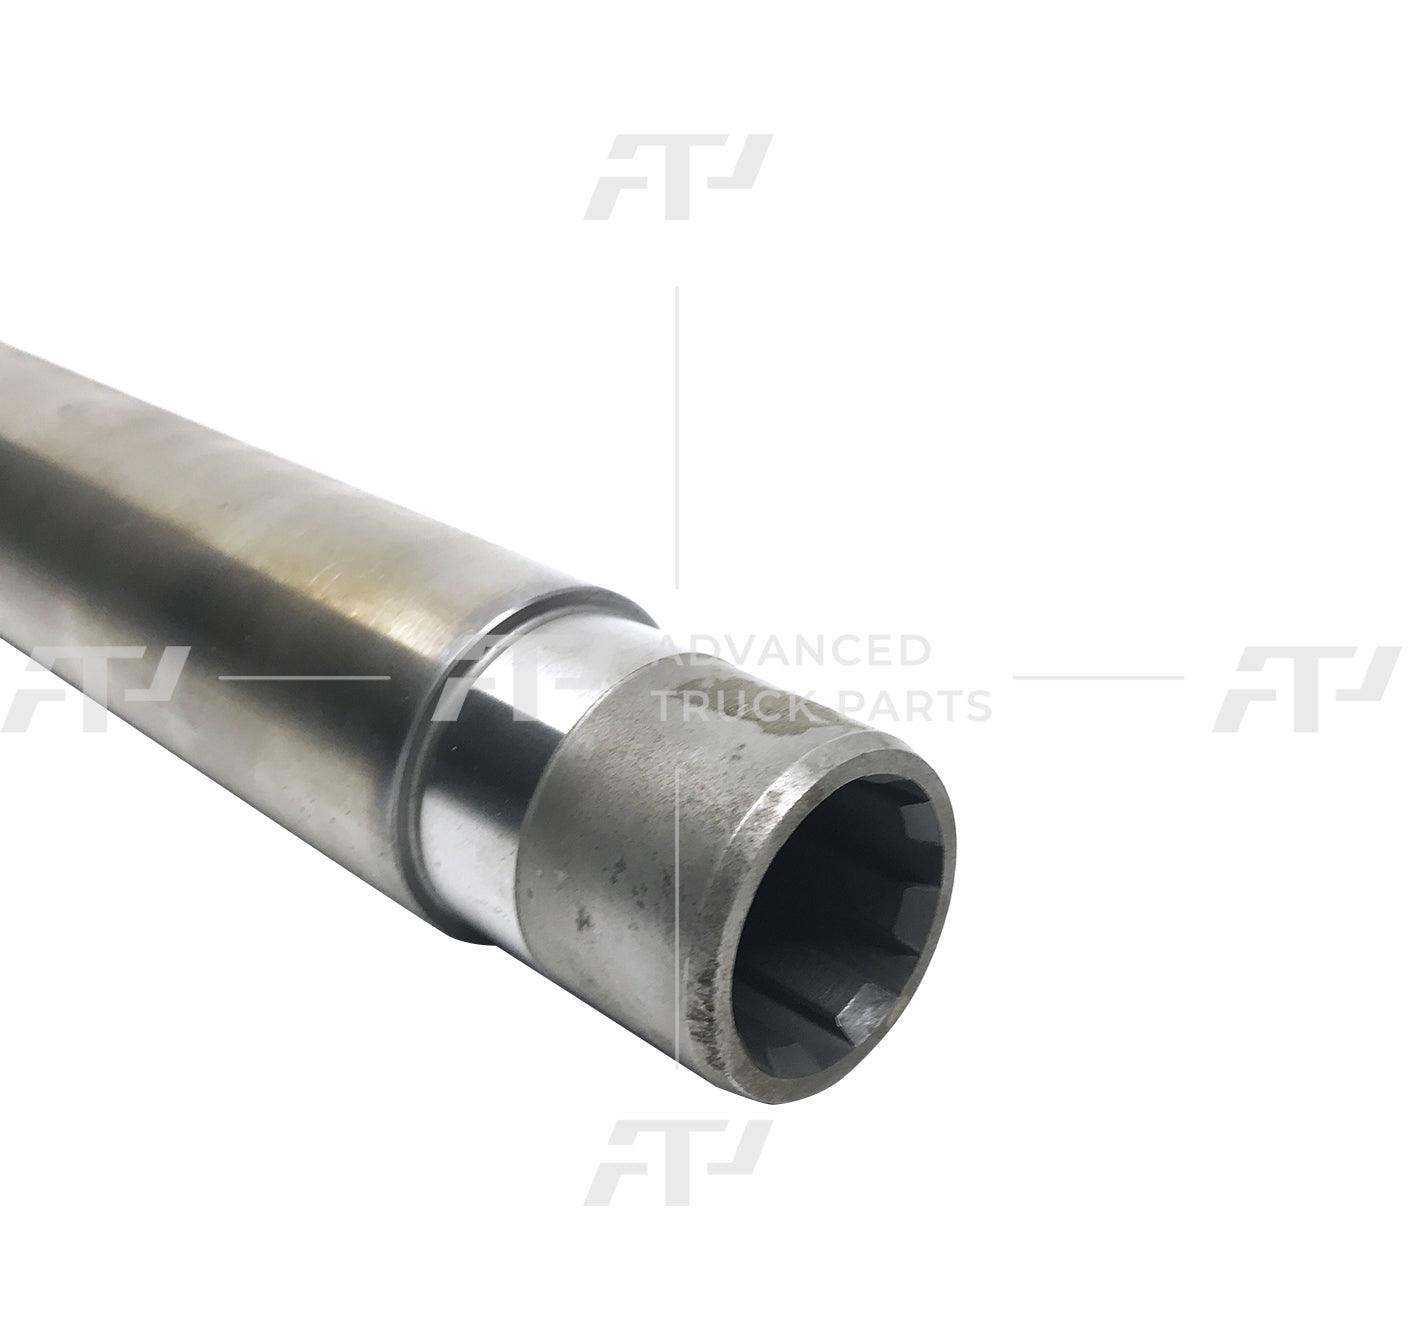 06T40553 Muncie Pto Power Take Off Output Shaft I Cs20 For Series Din 5462 - ADVANCED TRUCK PARTS